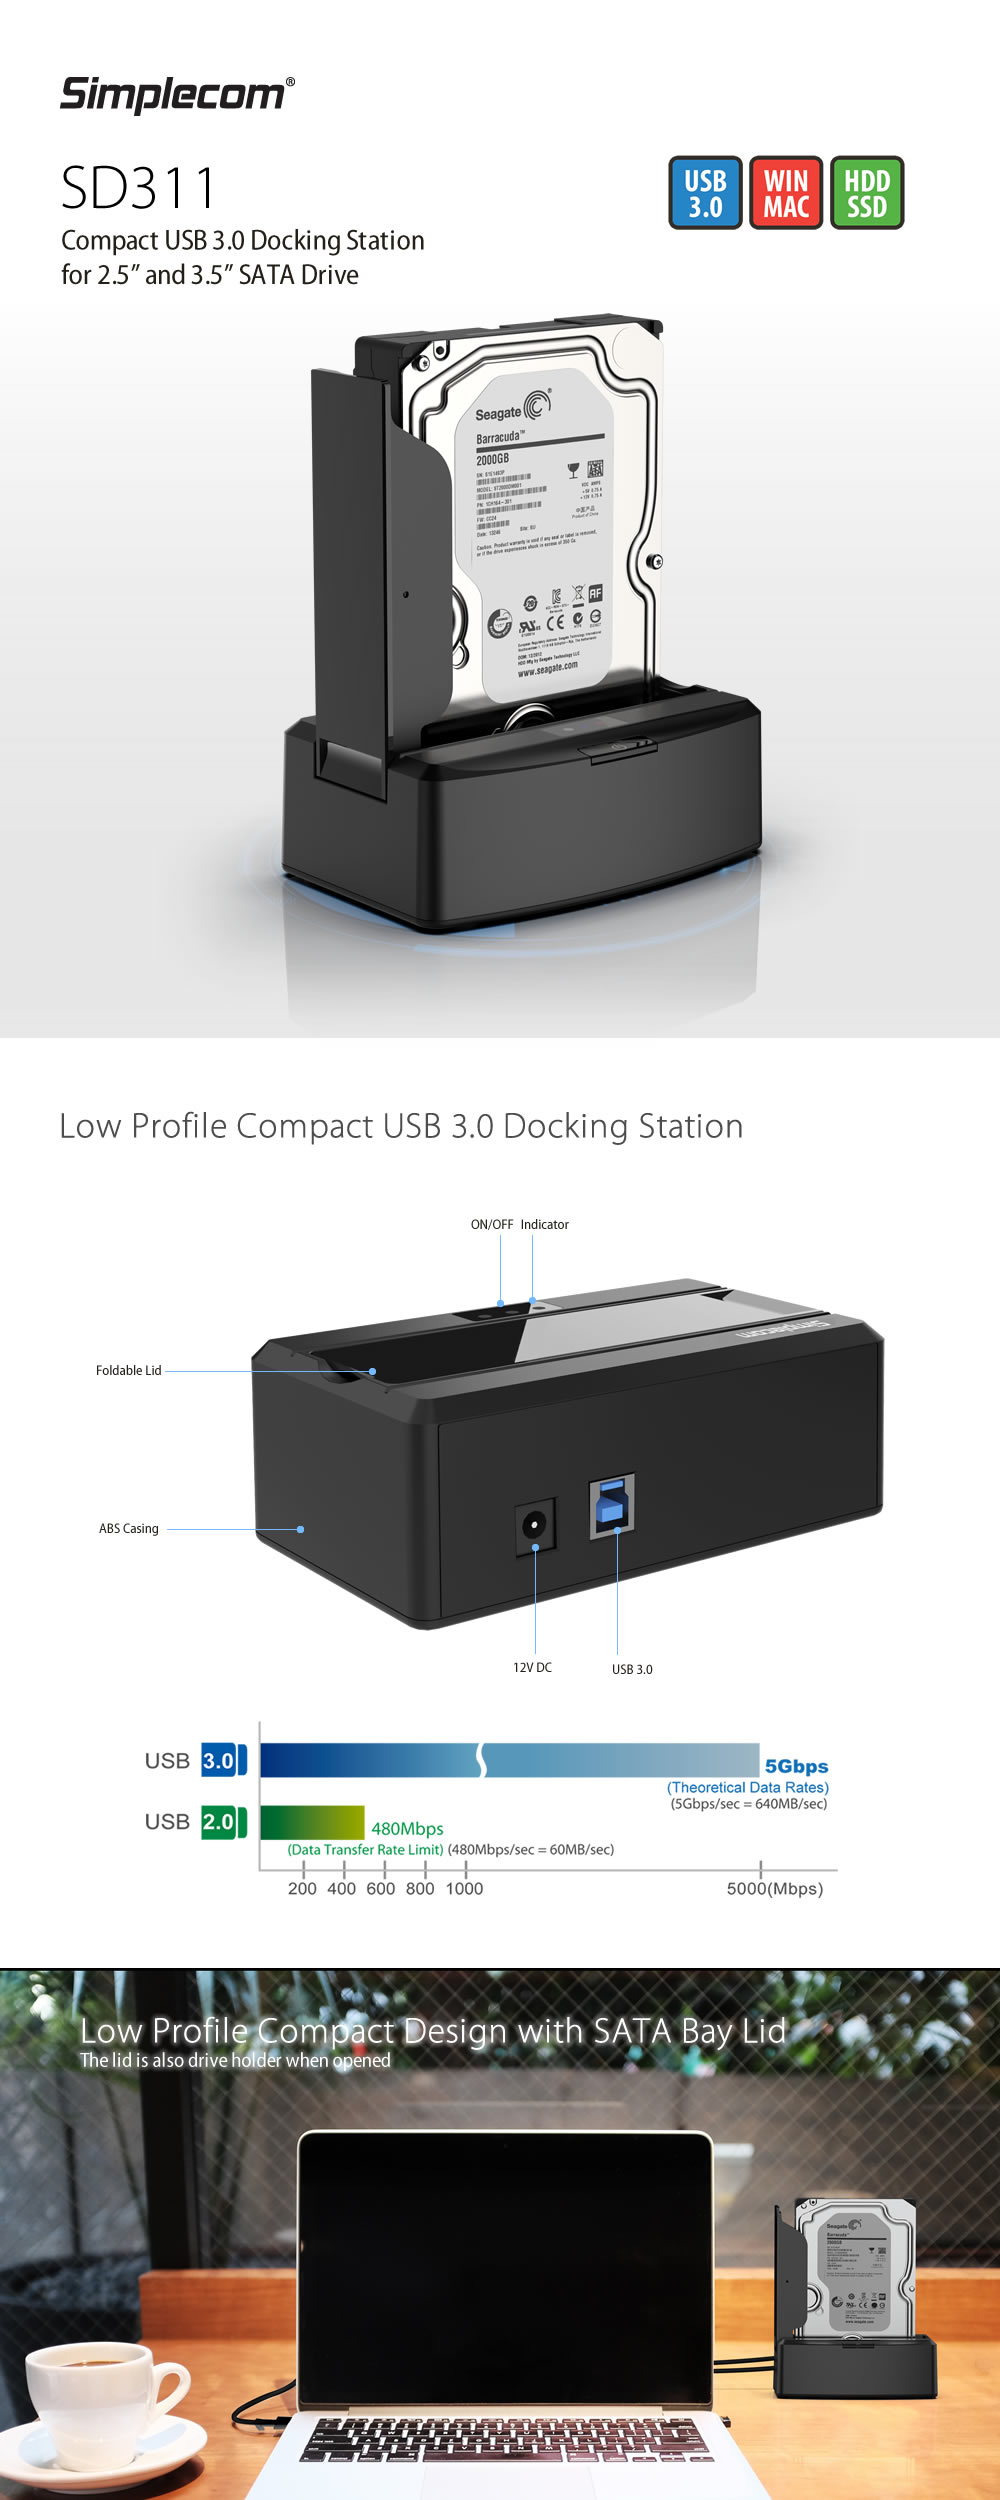 Simplecom SD311 USB 3.0 Docking Station with Lid for 2.5" and 3.5" SATA Drive Black 1